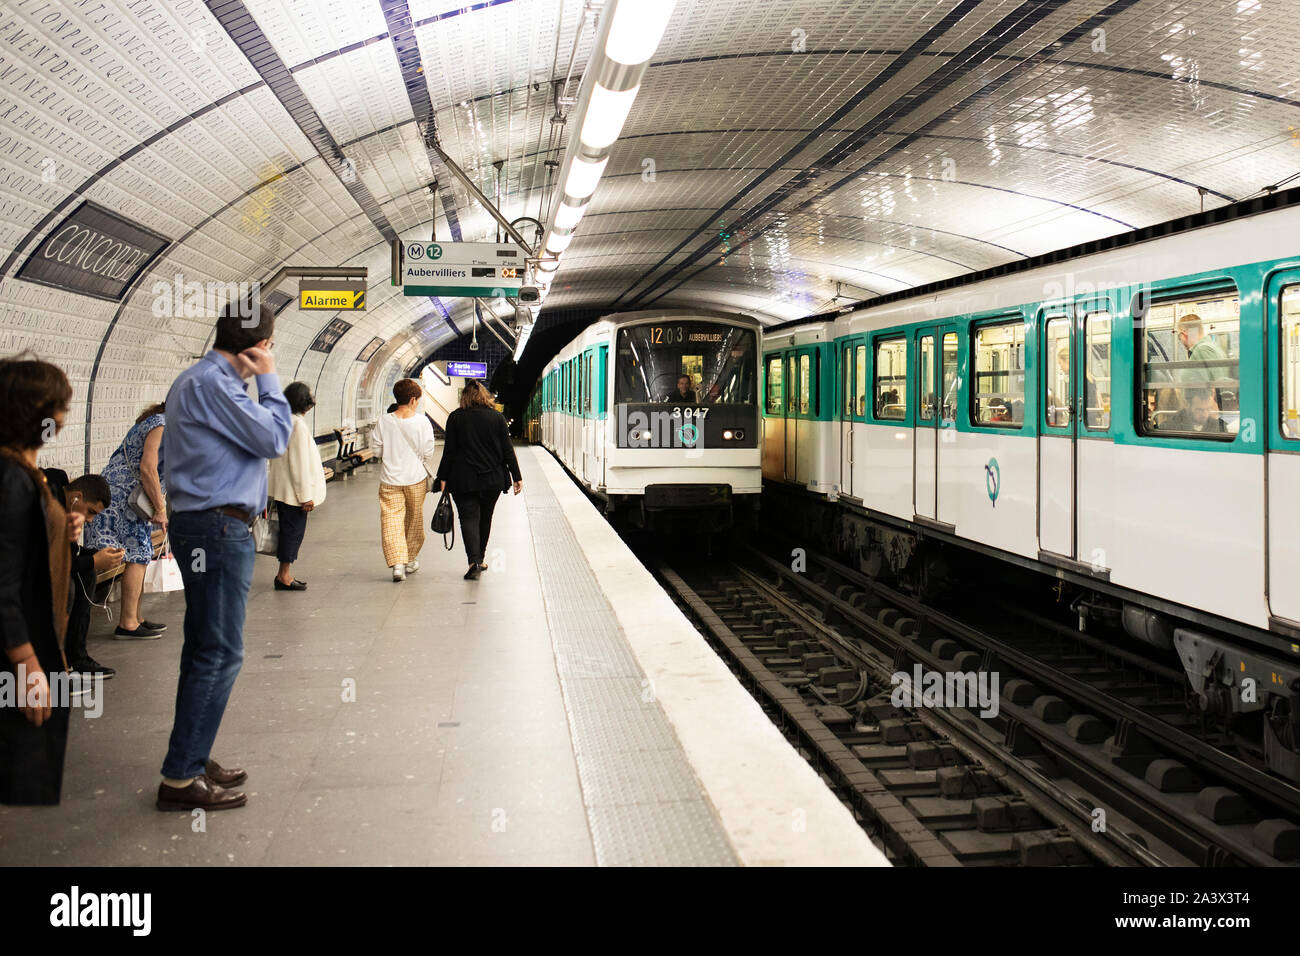 A train arriving into the Concorde metro station in Paris, France. Stock Photo